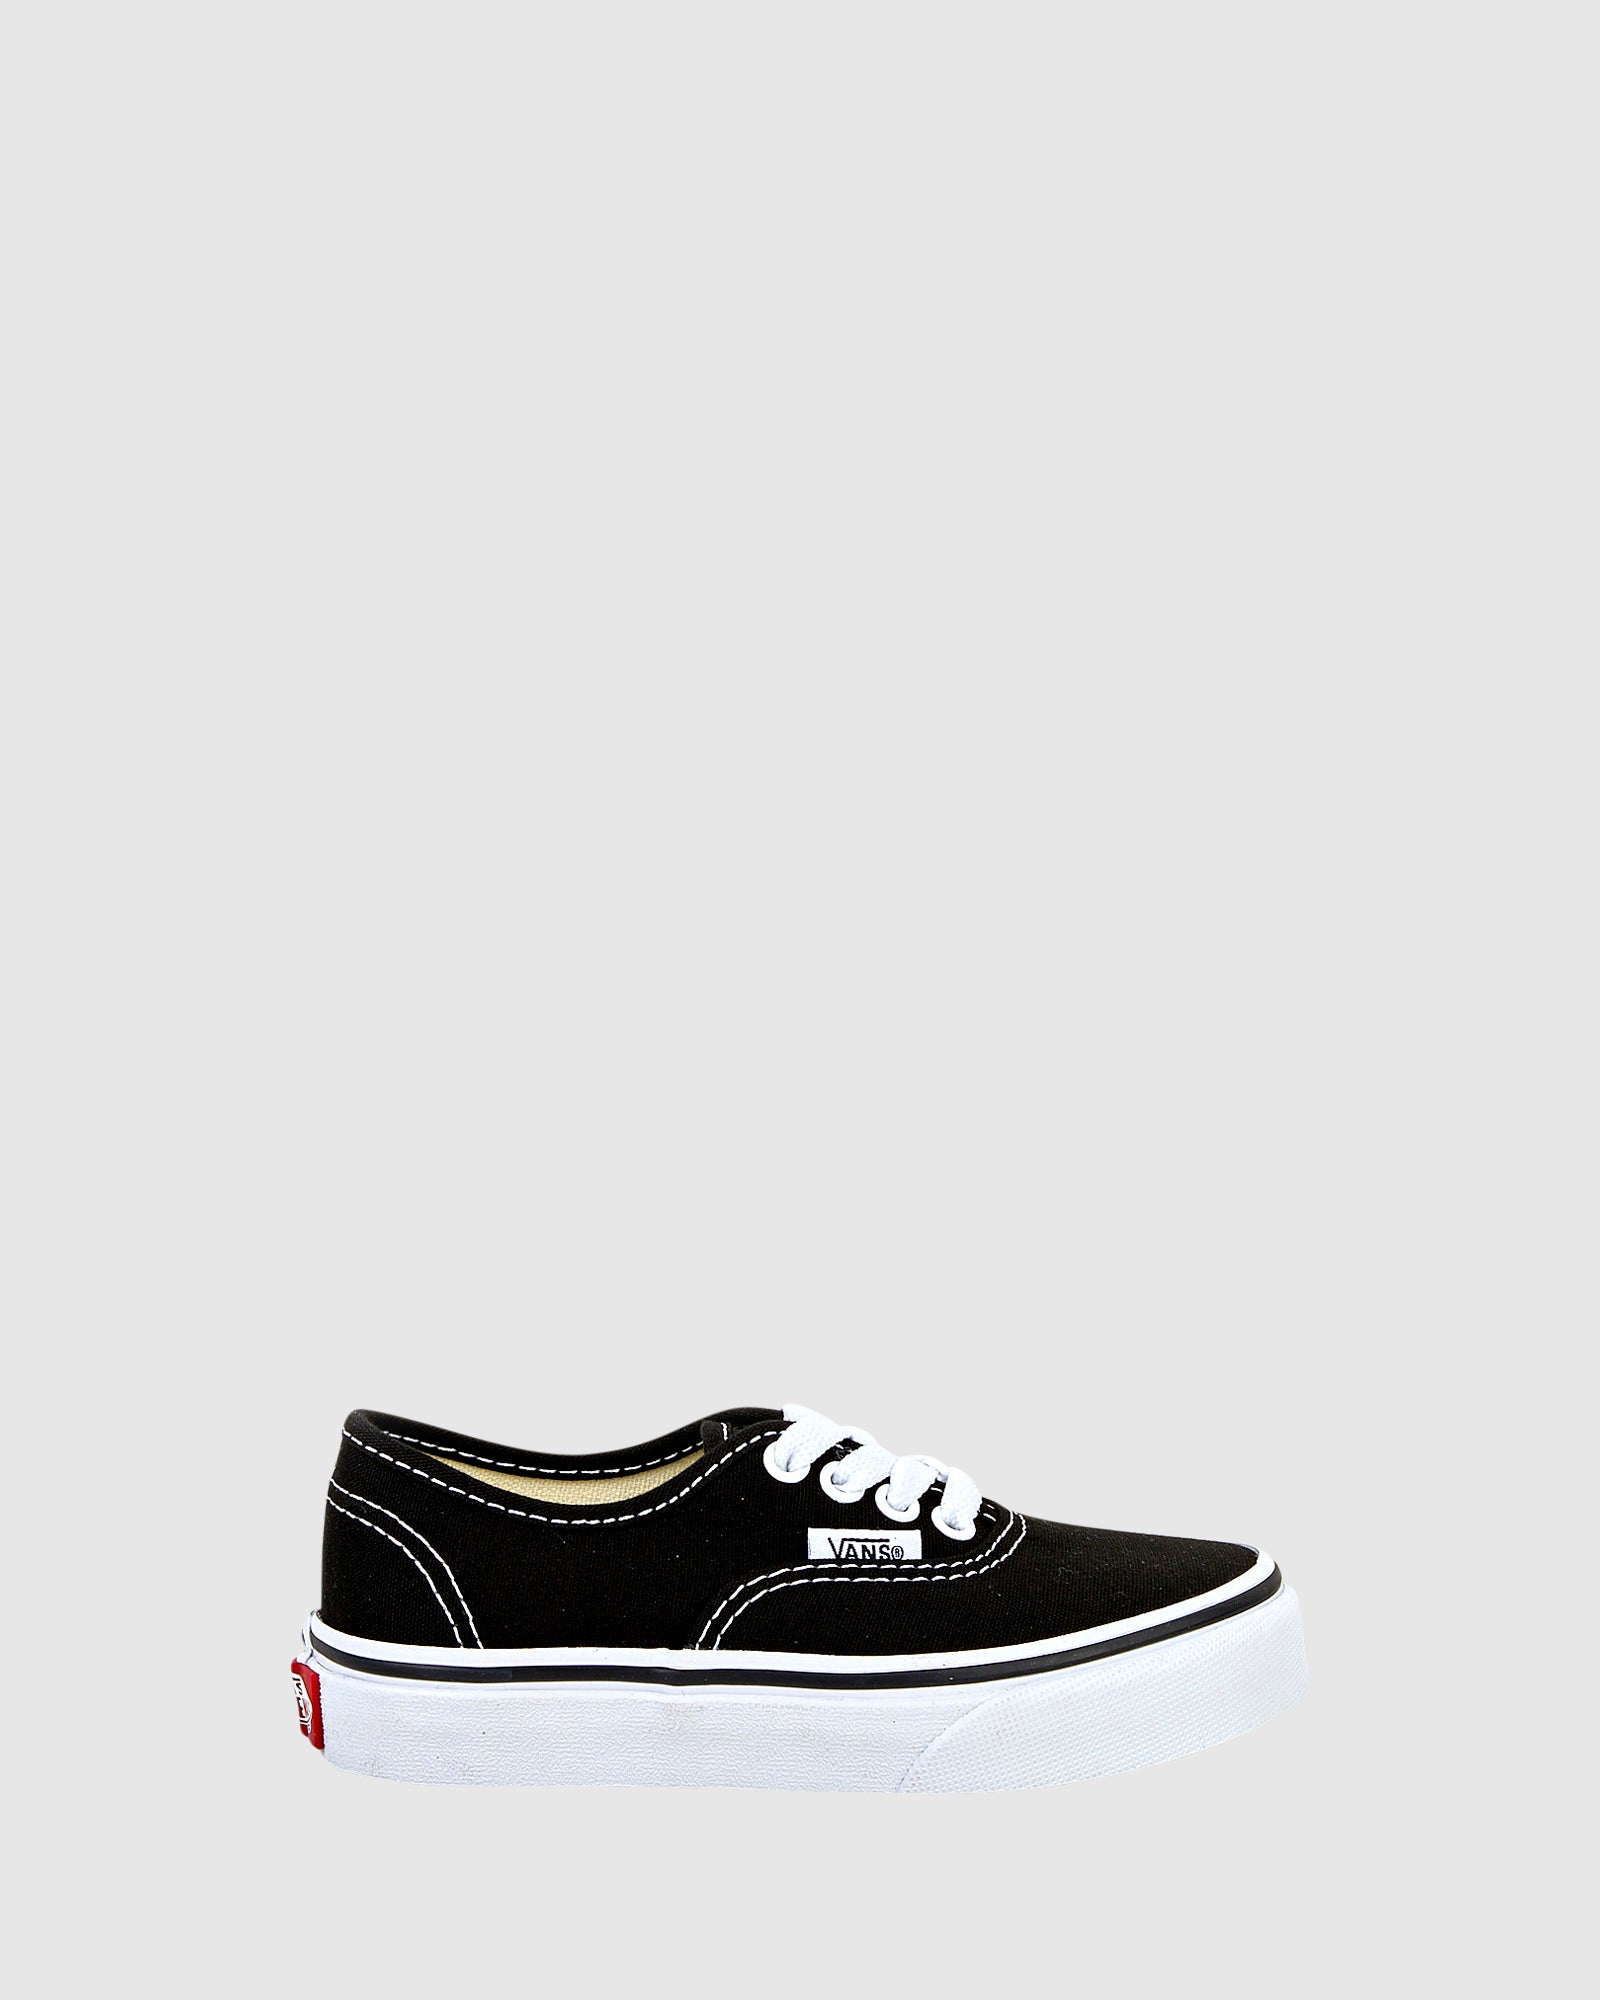 Authentic Youth Black White